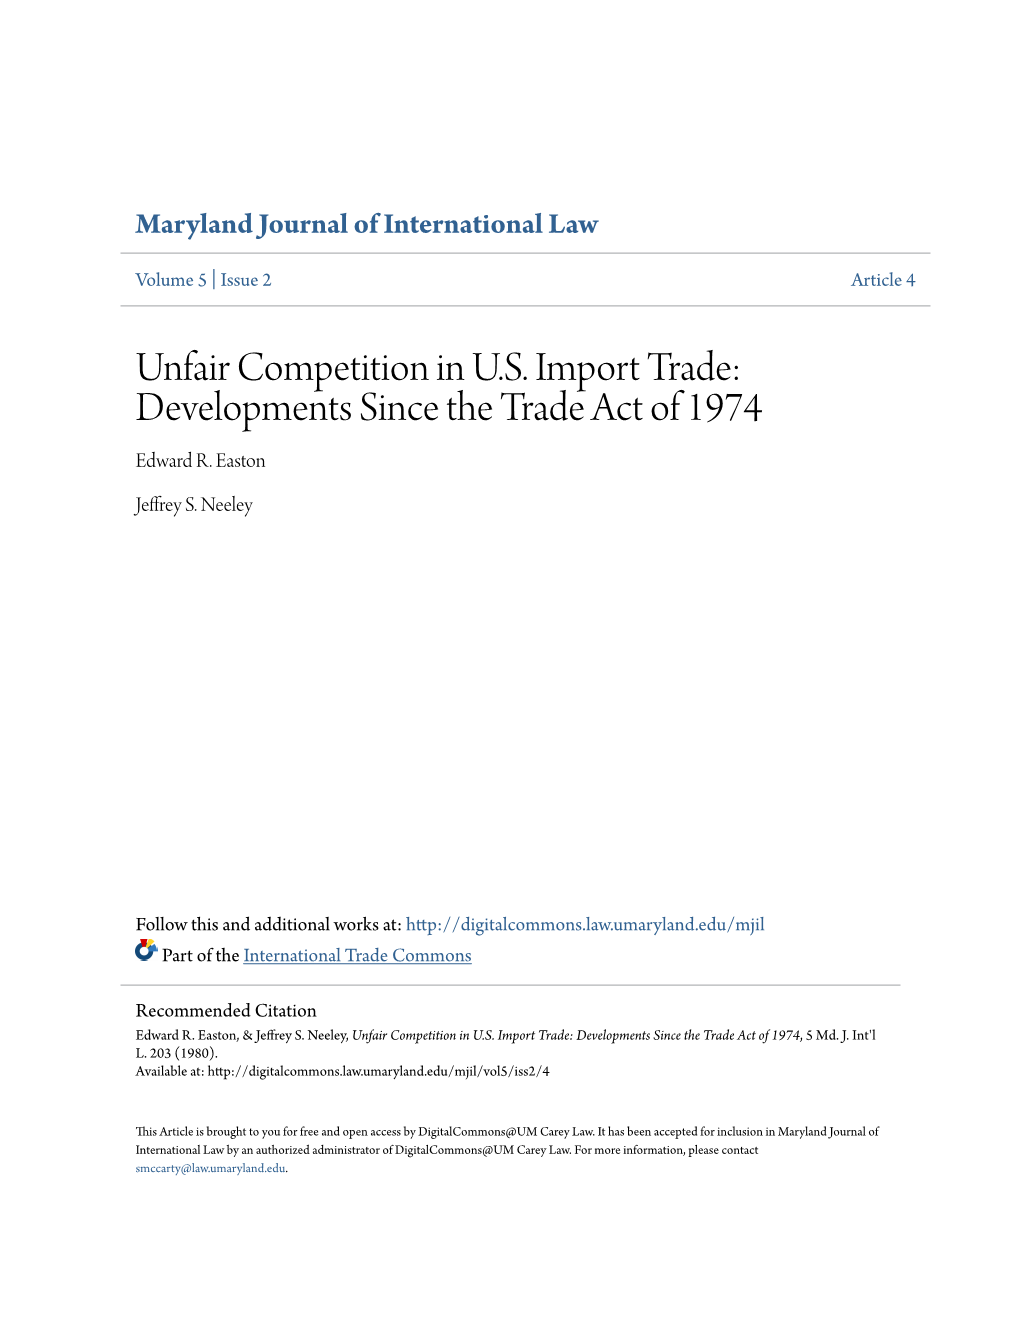 Unfair Competition in US Import Trade